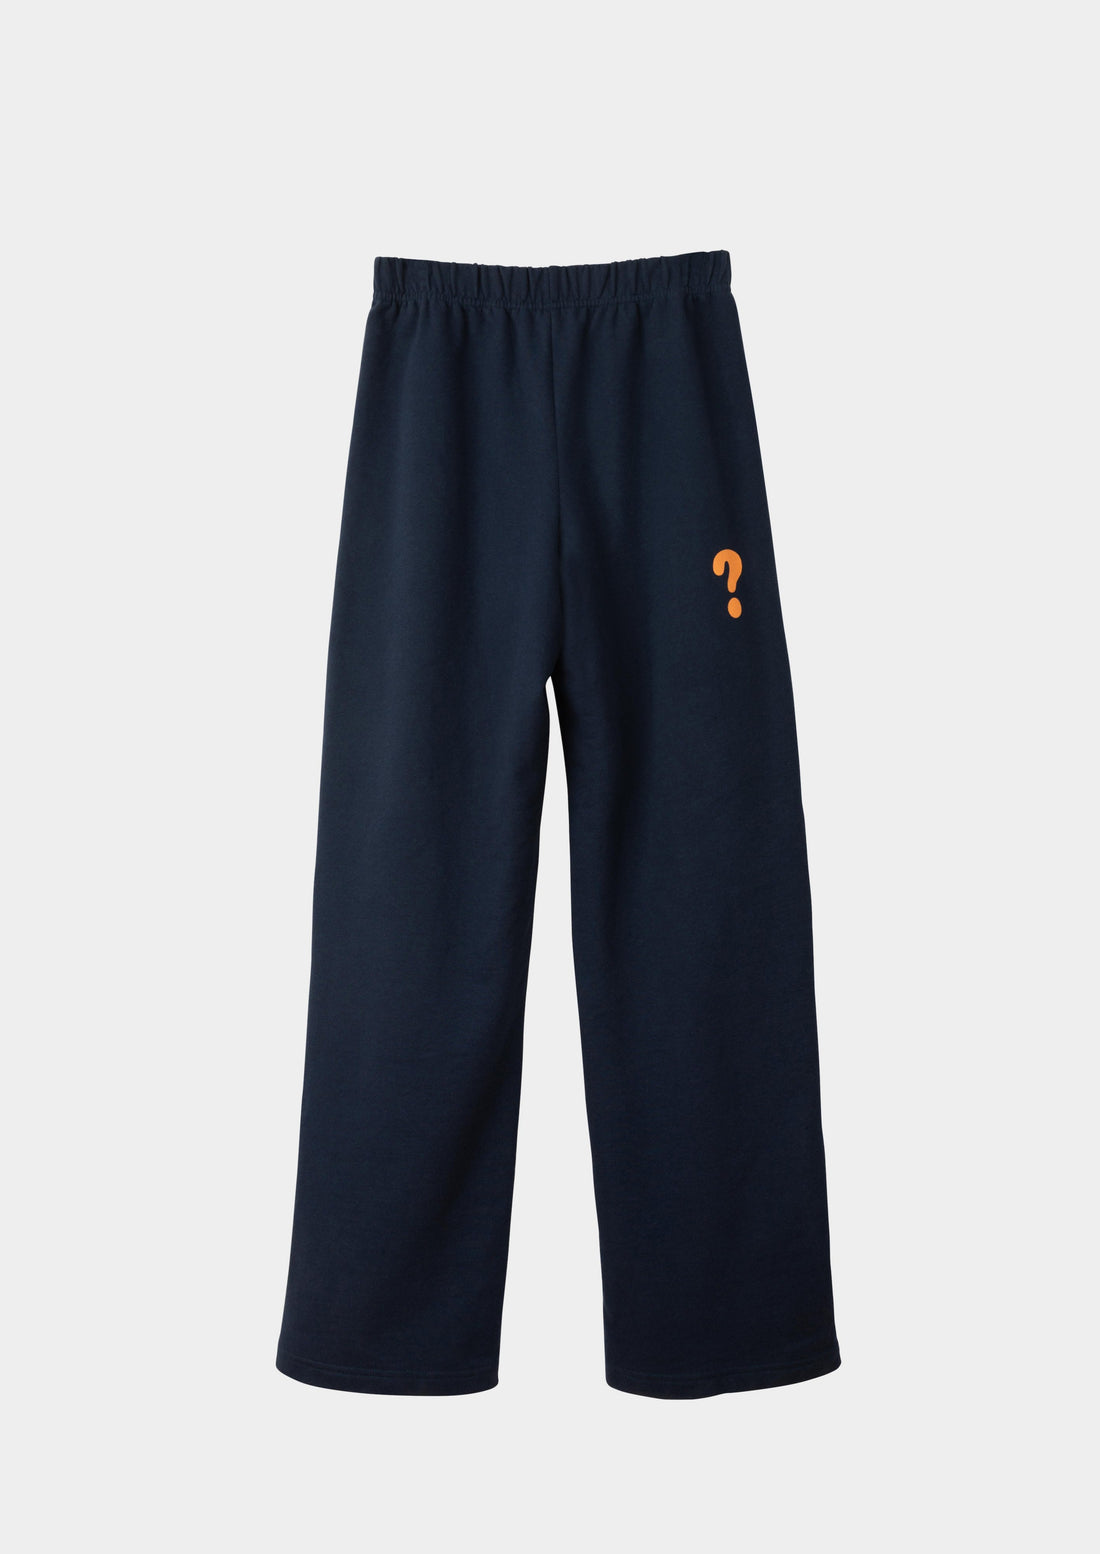 Dooz What's Your Sign? navy cotton fleece sweatpant with elastic waistband and question mark silkscreen